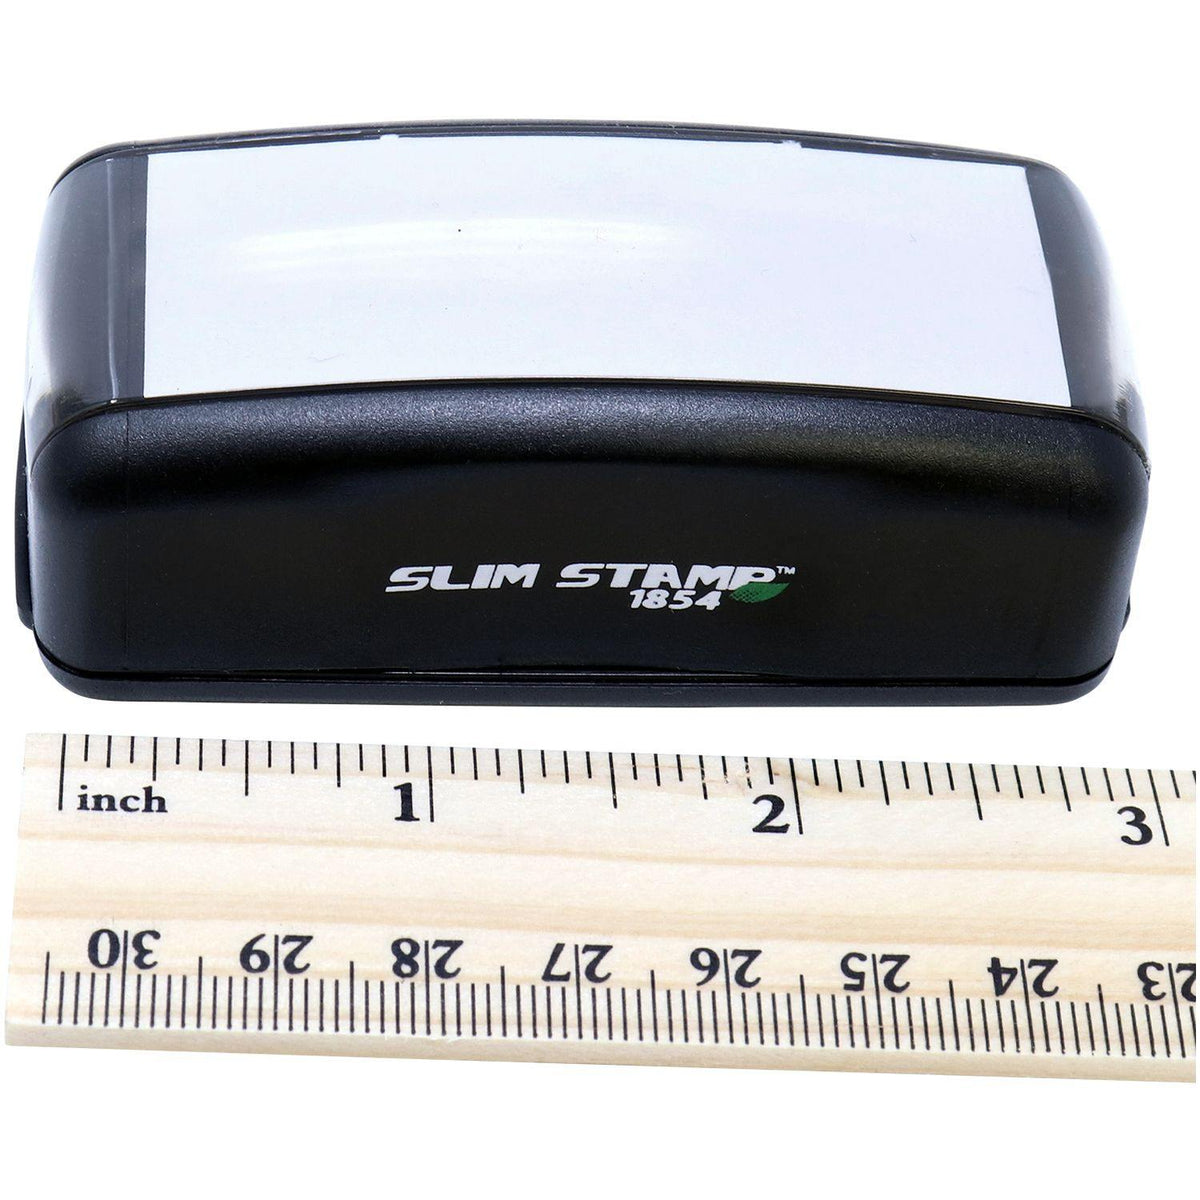 Measurement Large Pre-Inked Cleaned and Sanitized Stamp with Ruler